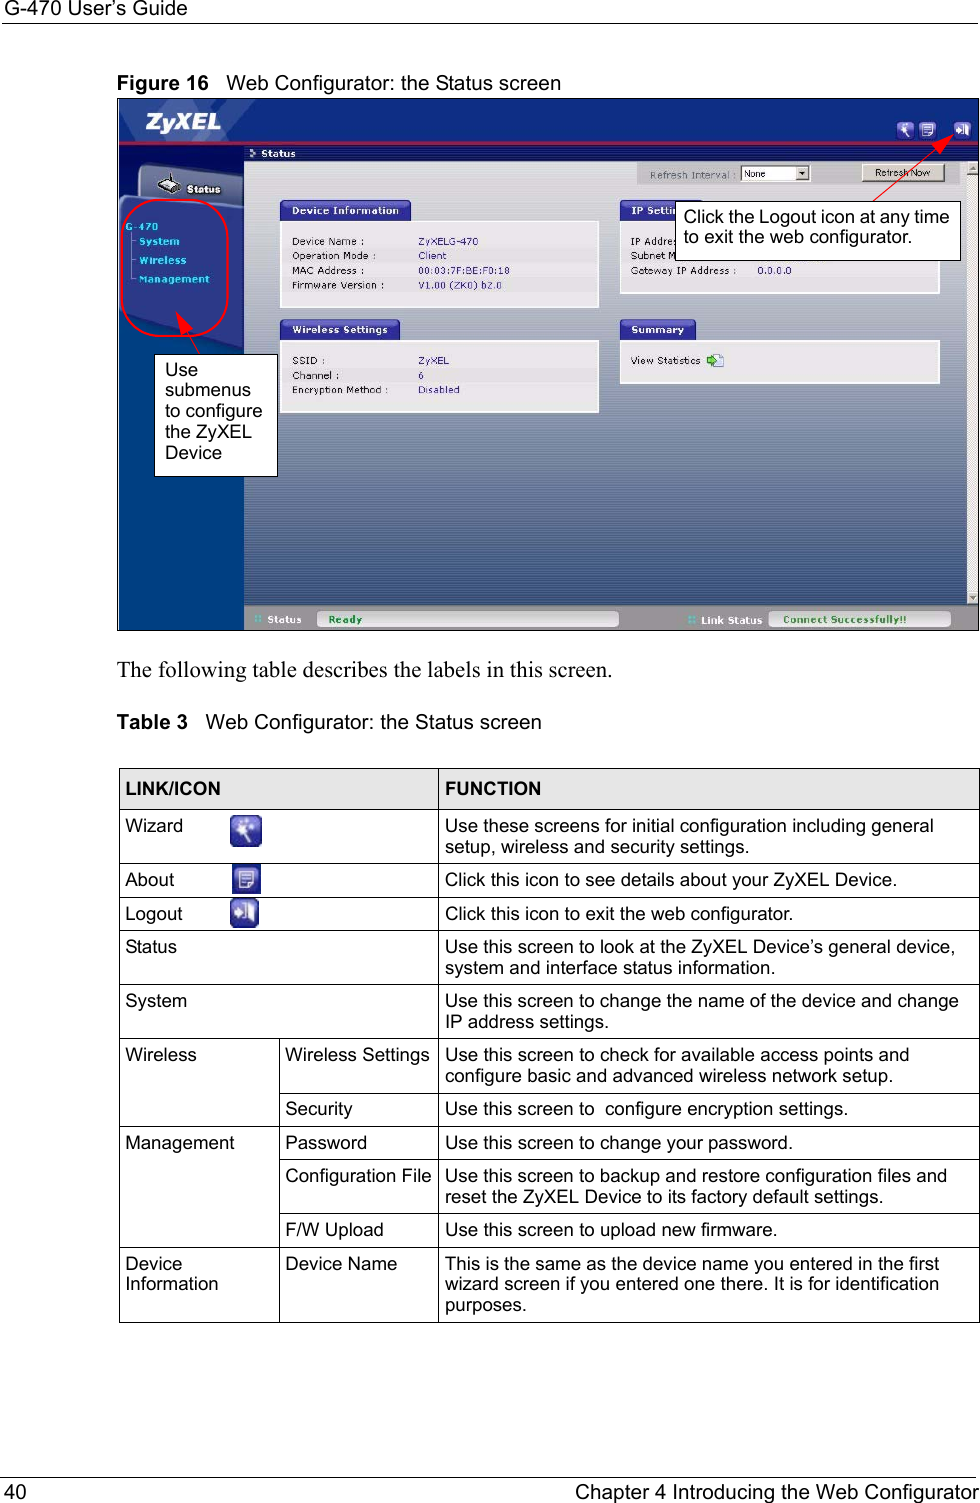 G-470 User’s Guide40 Chapter 4 Introducing the Web ConfiguratorFigure 16   Web Configurator: the Status screen The following table describes the labels in this screen.Table 3   Web Configurator: the Status screenLINK/ICON FUNCTIONWizard  Use these screens for initial configuration including general setup, wireless and security settings.About  Click this icon to see details about your ZyXEL Device.Logout  Click this icon to exit the web configurator.Status Use this screen to look at the ZyXEL Device’s general device, system and interface status information.System Use this screen to change the name of the device and change IP address settings.Wireless Wireless Settings Use this screen to check for available access points and configure basic and advanced wireless network setup.Security Use this screen to  configure encryption settings.Management Password Use this screen to change your password.Configuration File Use this screen to backup and restore configuration files and reset the ZyXEL Device to its factory default settings.F/W Upload Use this screen to upload new firmware.Device InformationDevice Name This is the same as the device name you entered in the first wizard screen if you entered one there. It is for identification purposes.Click the Logout icon at any time to exit the web configurator.Use submenus to configure the ZyXEL Device 